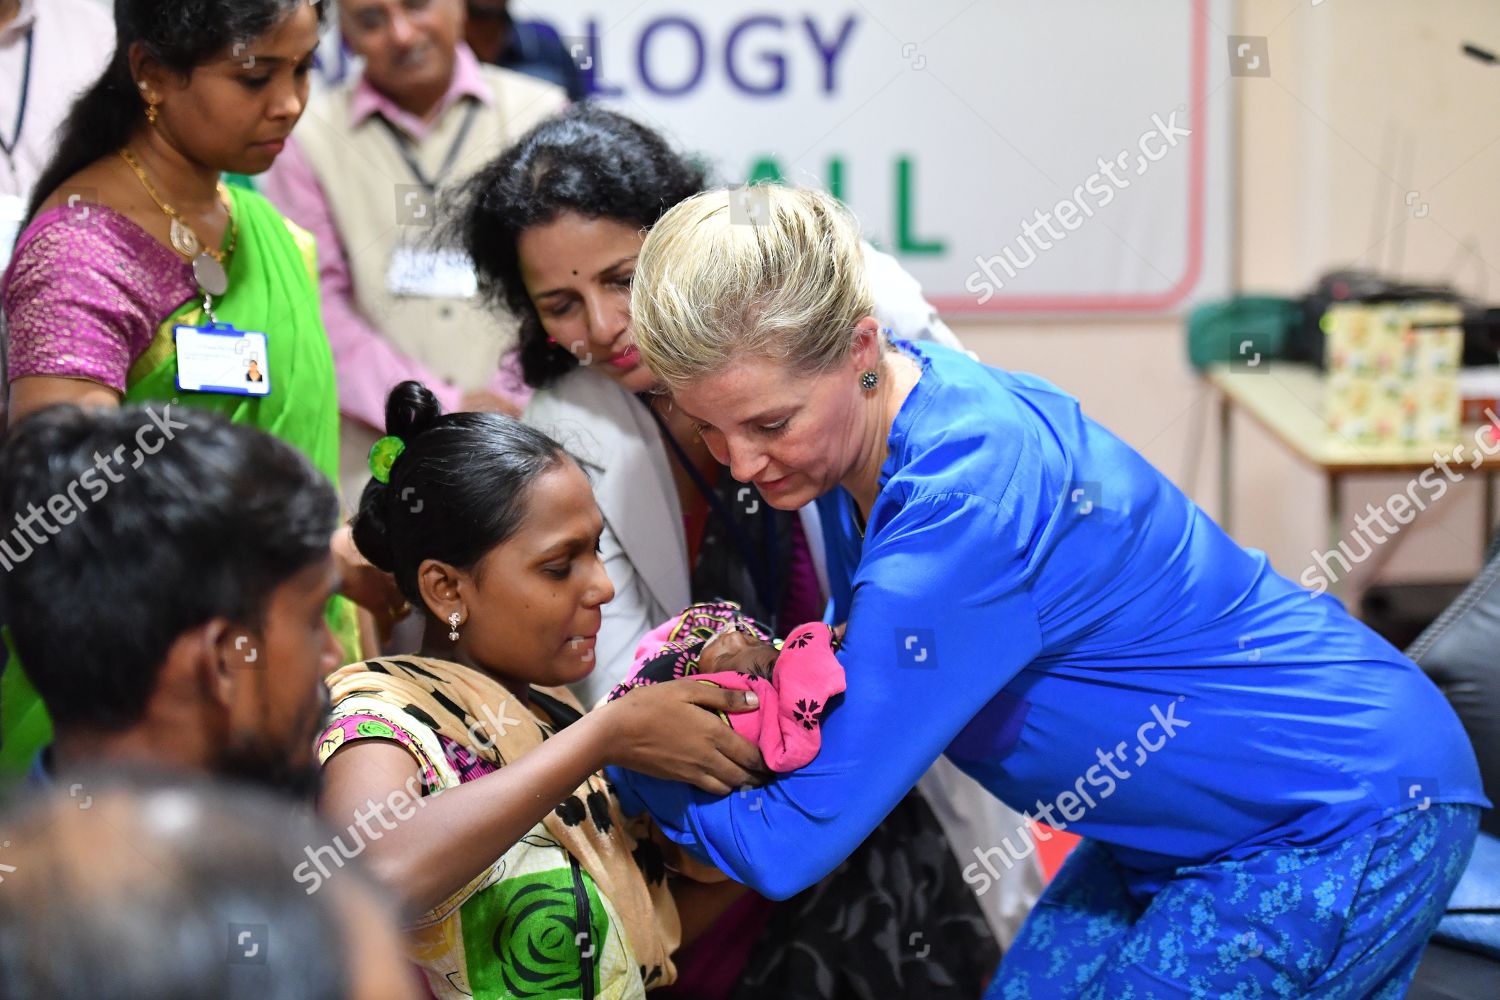 sophie-countess-of-wessex-visit-to-india-shutterstock-editorial-10222586ah.jpg